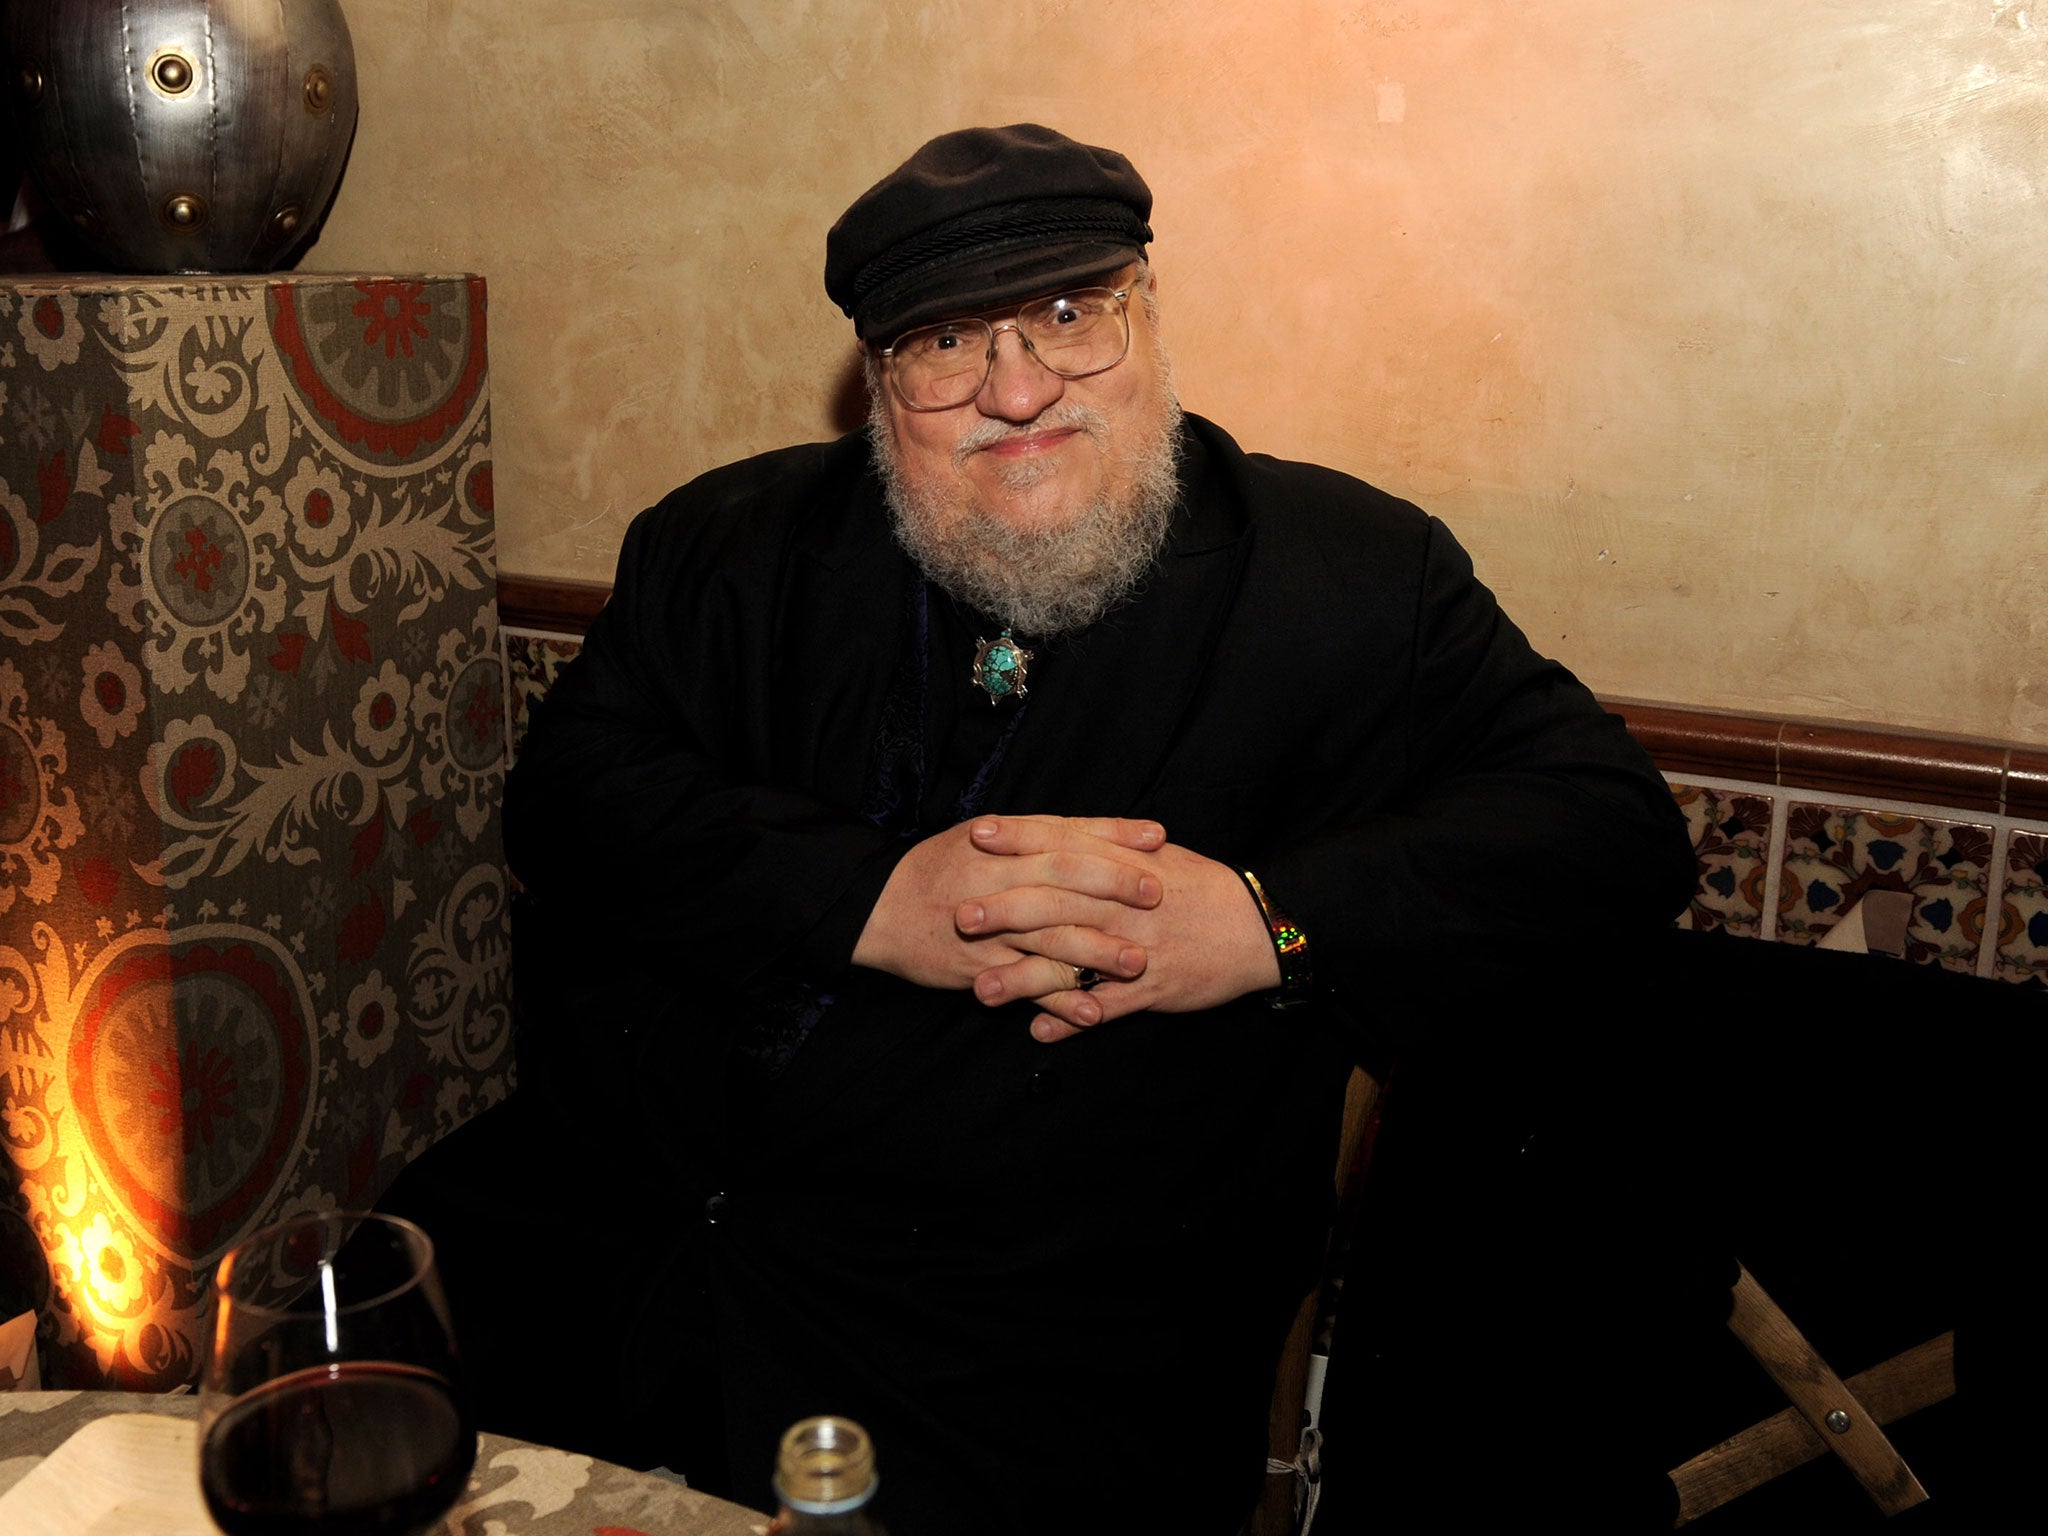 Game of Thrones author George RR Martin is 'stubborn' says his editor